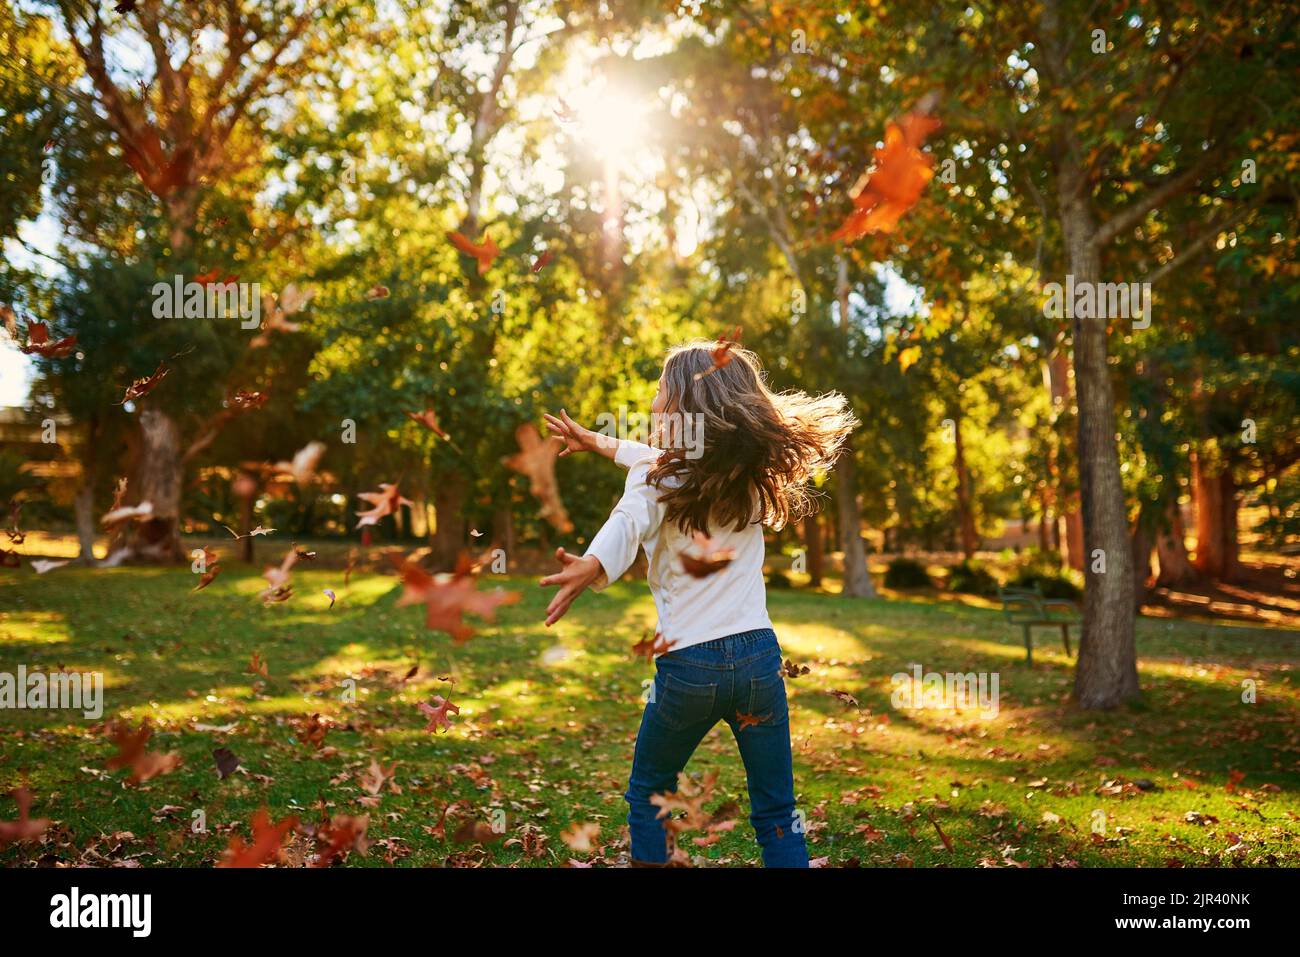 Nothing says fun like playing amongst the autumn leaves. a happy little girl playing in the autumn leaves outdoors. Stock Photo